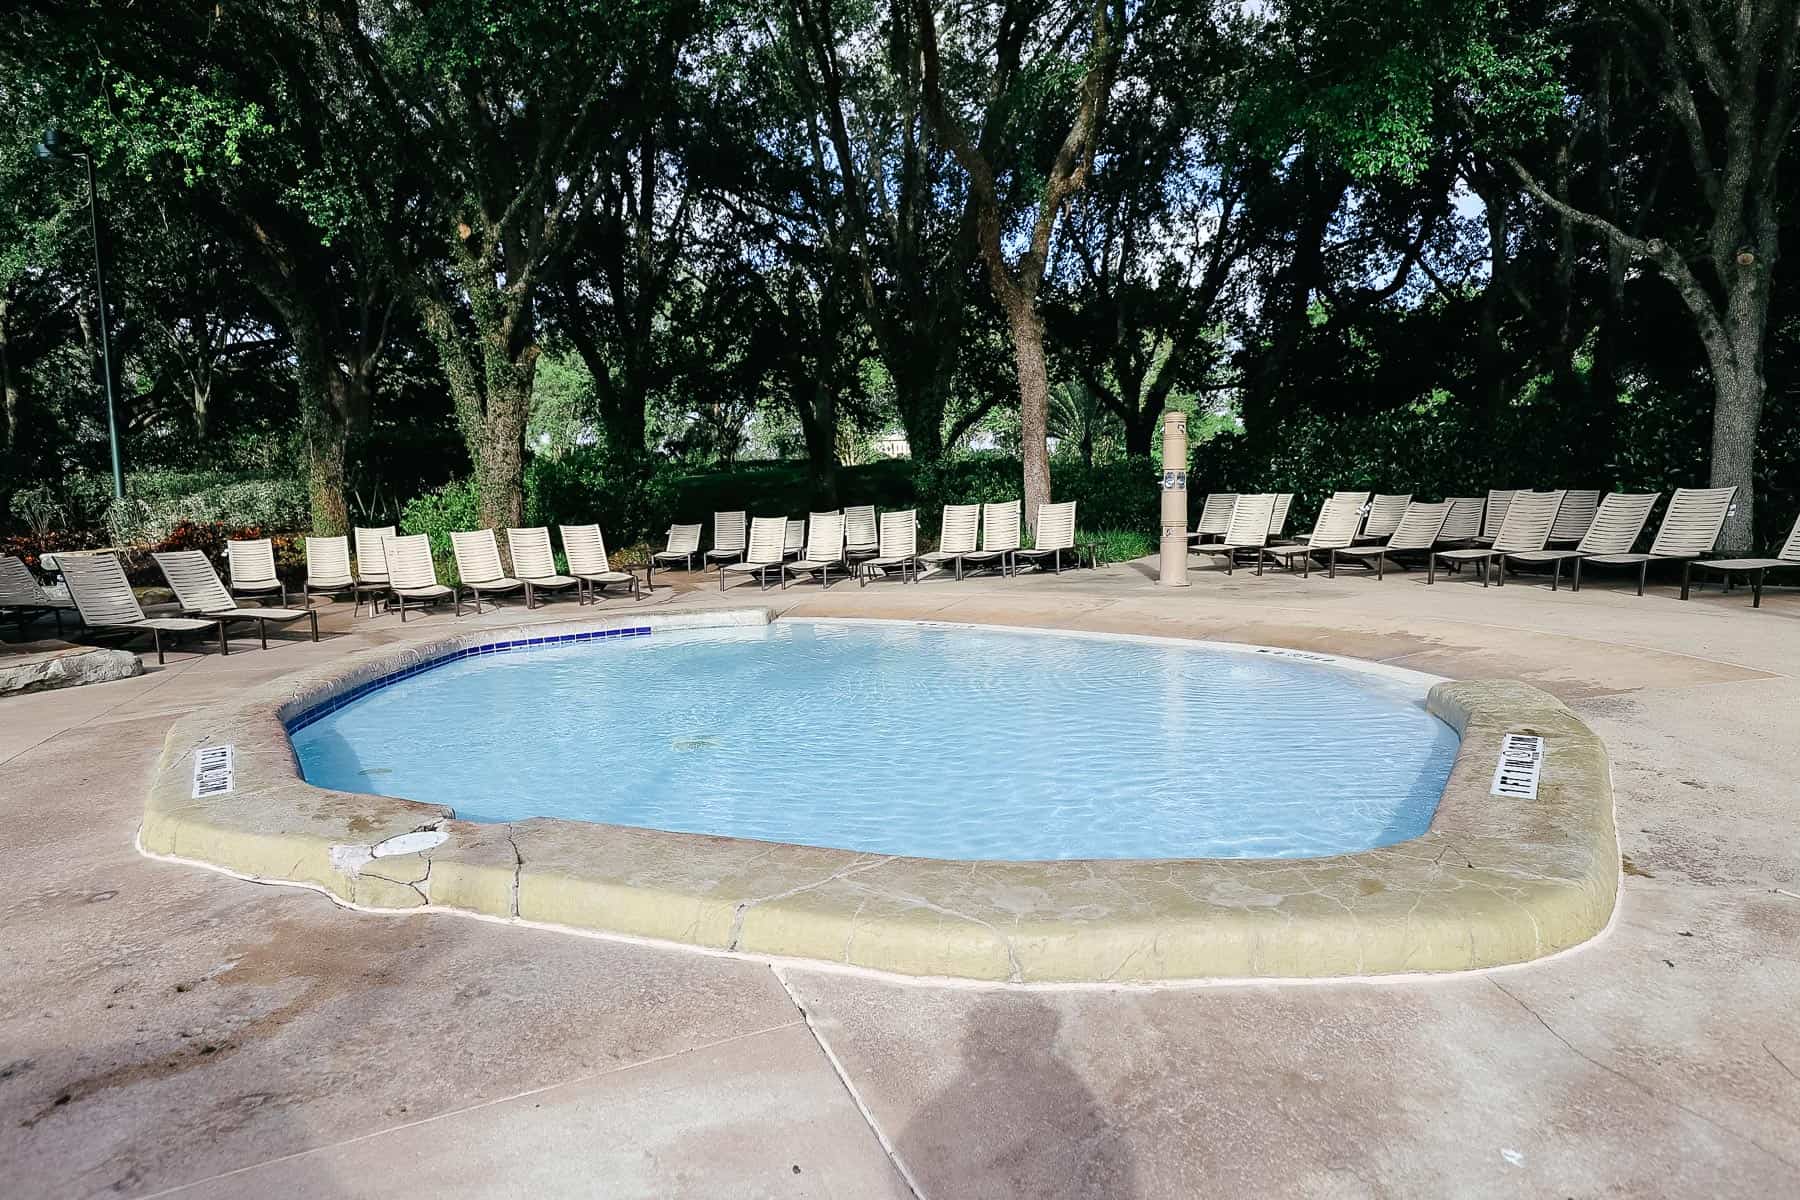 the kiddie pool at the Grotto Pool 